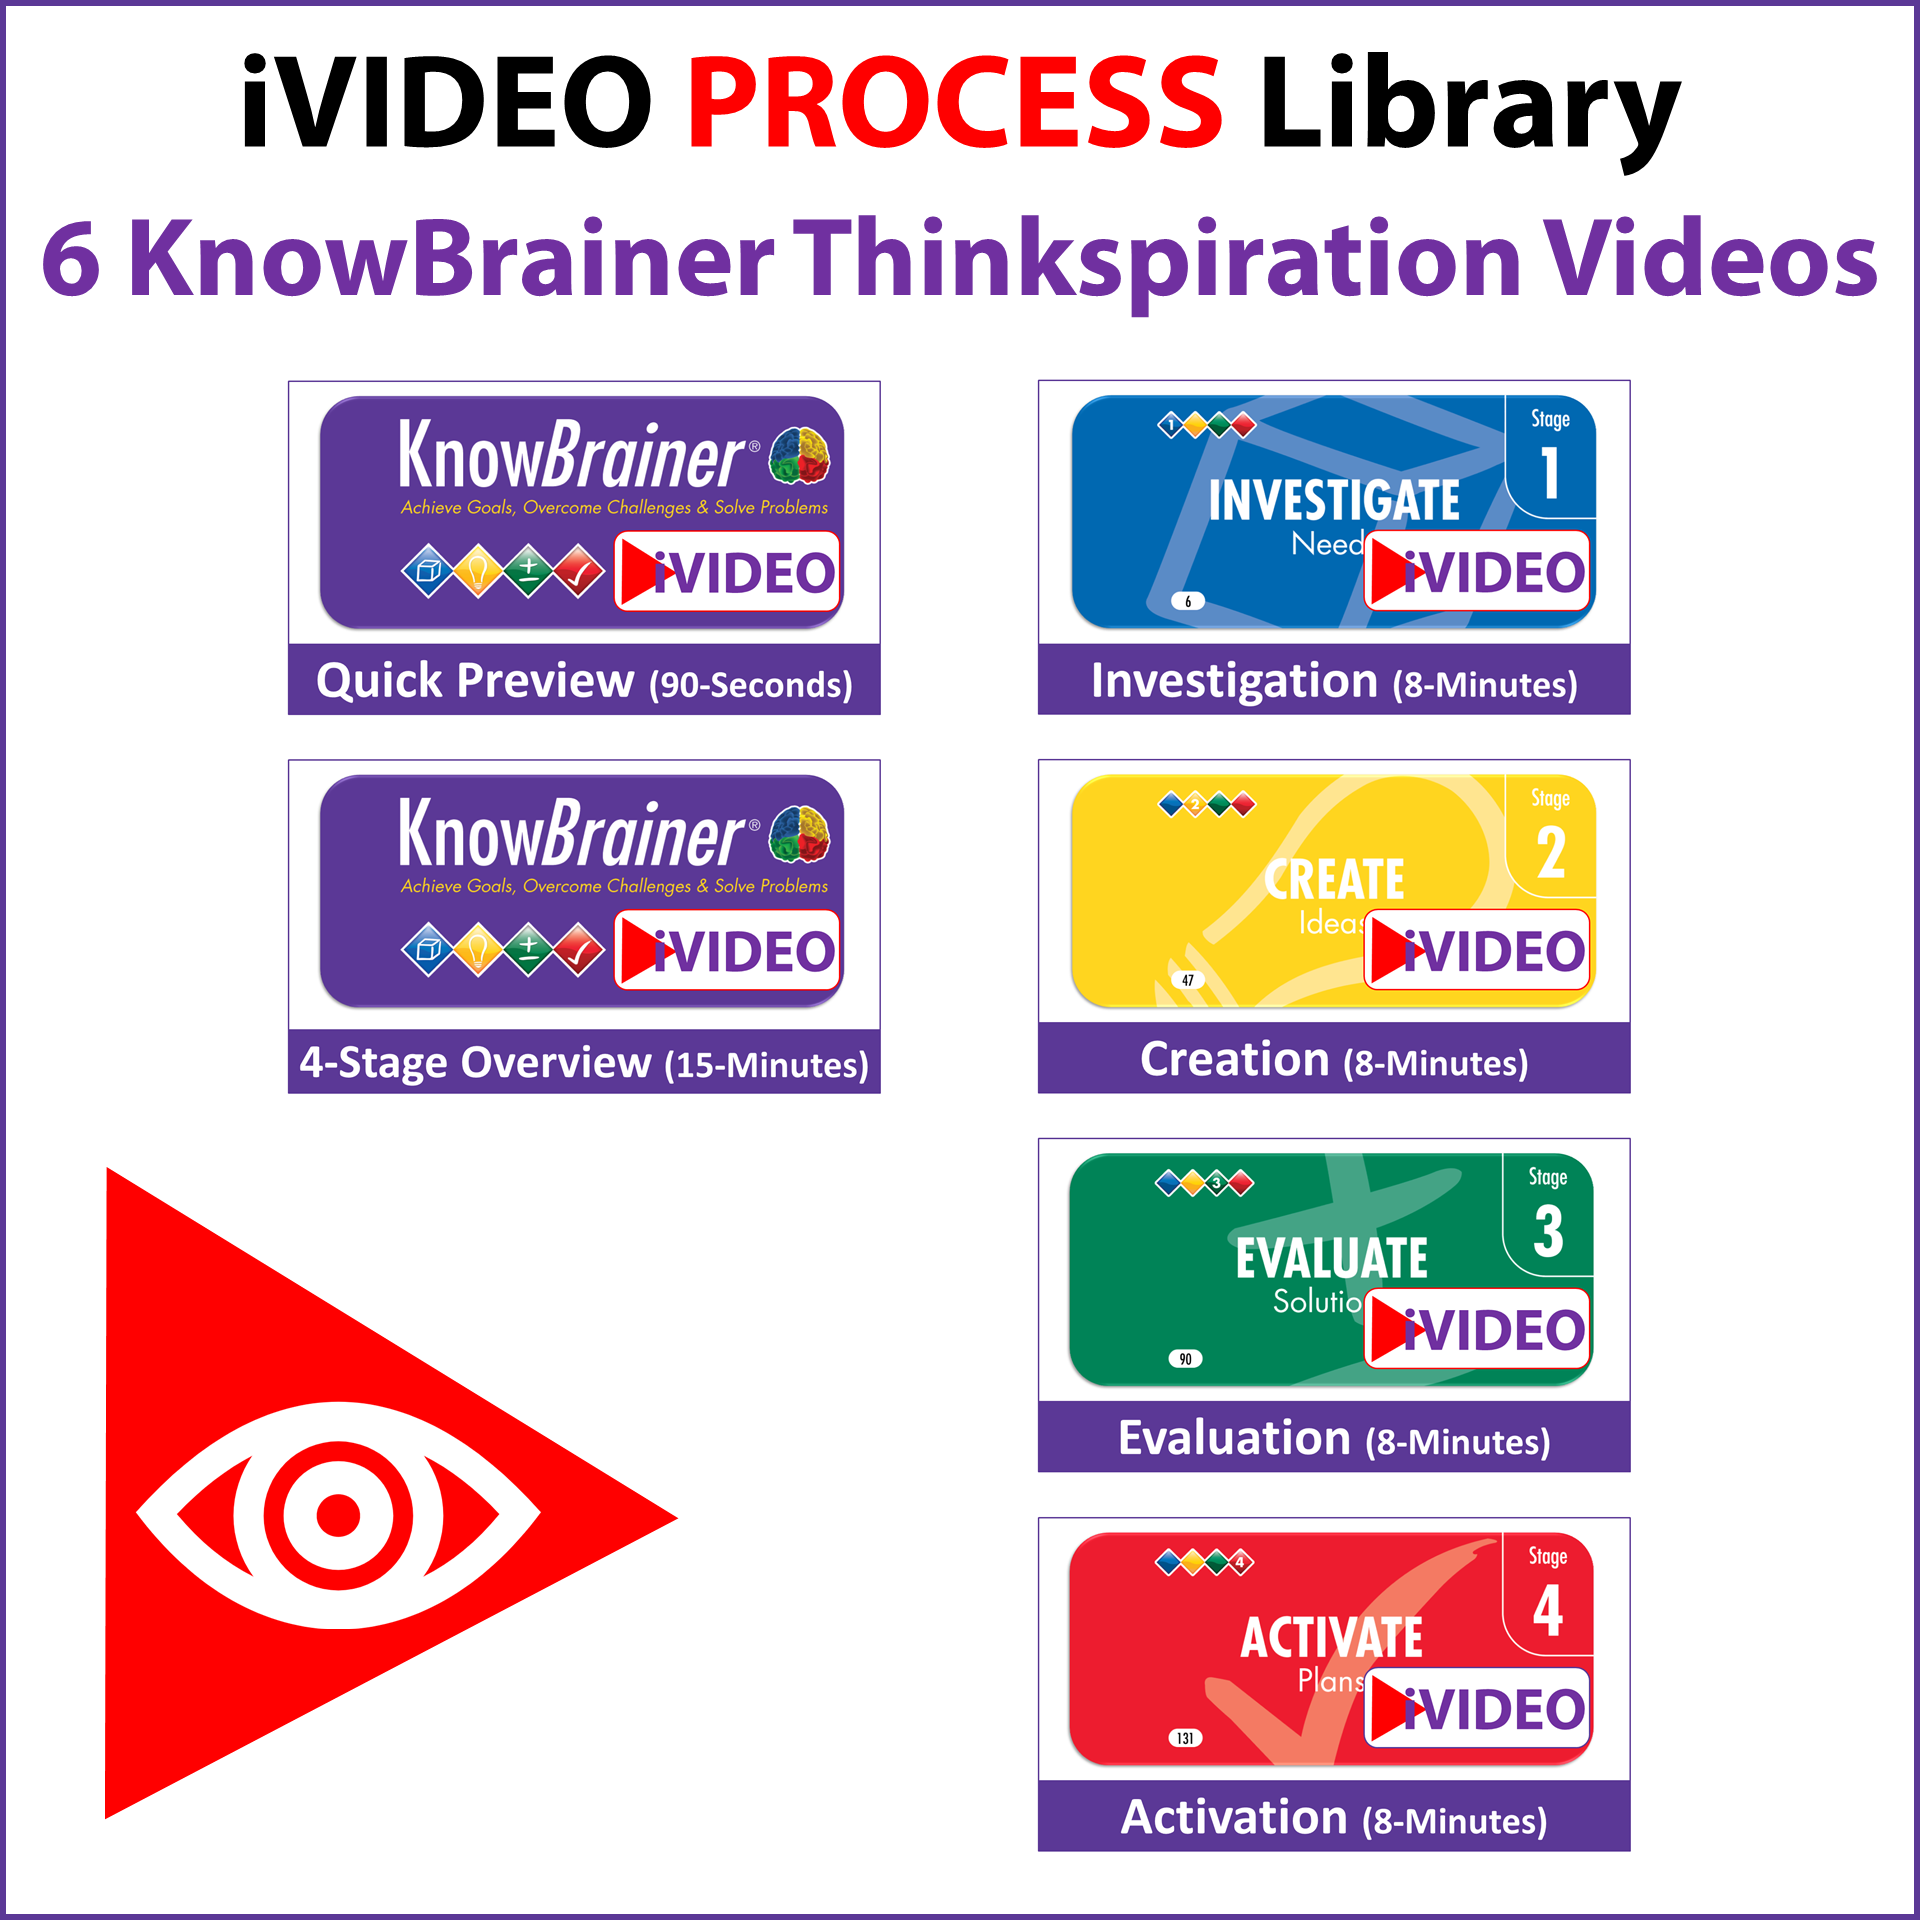 iVIDEO PROCESS Library KnowBrainer Thinkspiration Videos